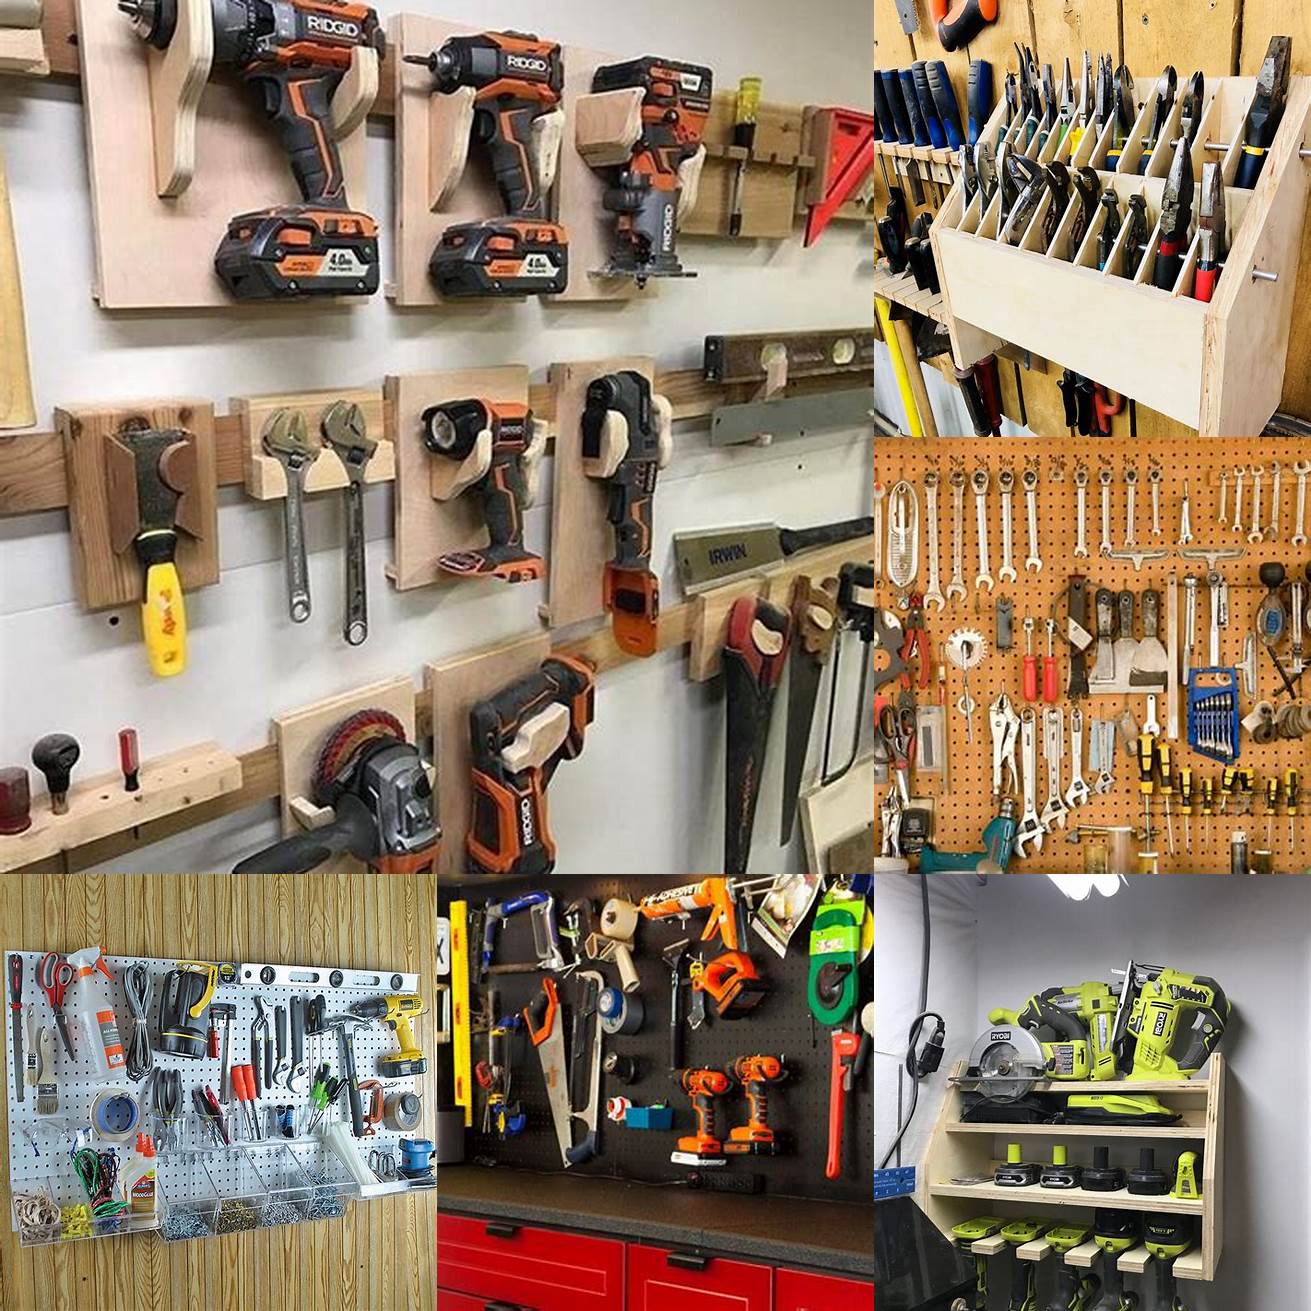 Organize your tools and equipment